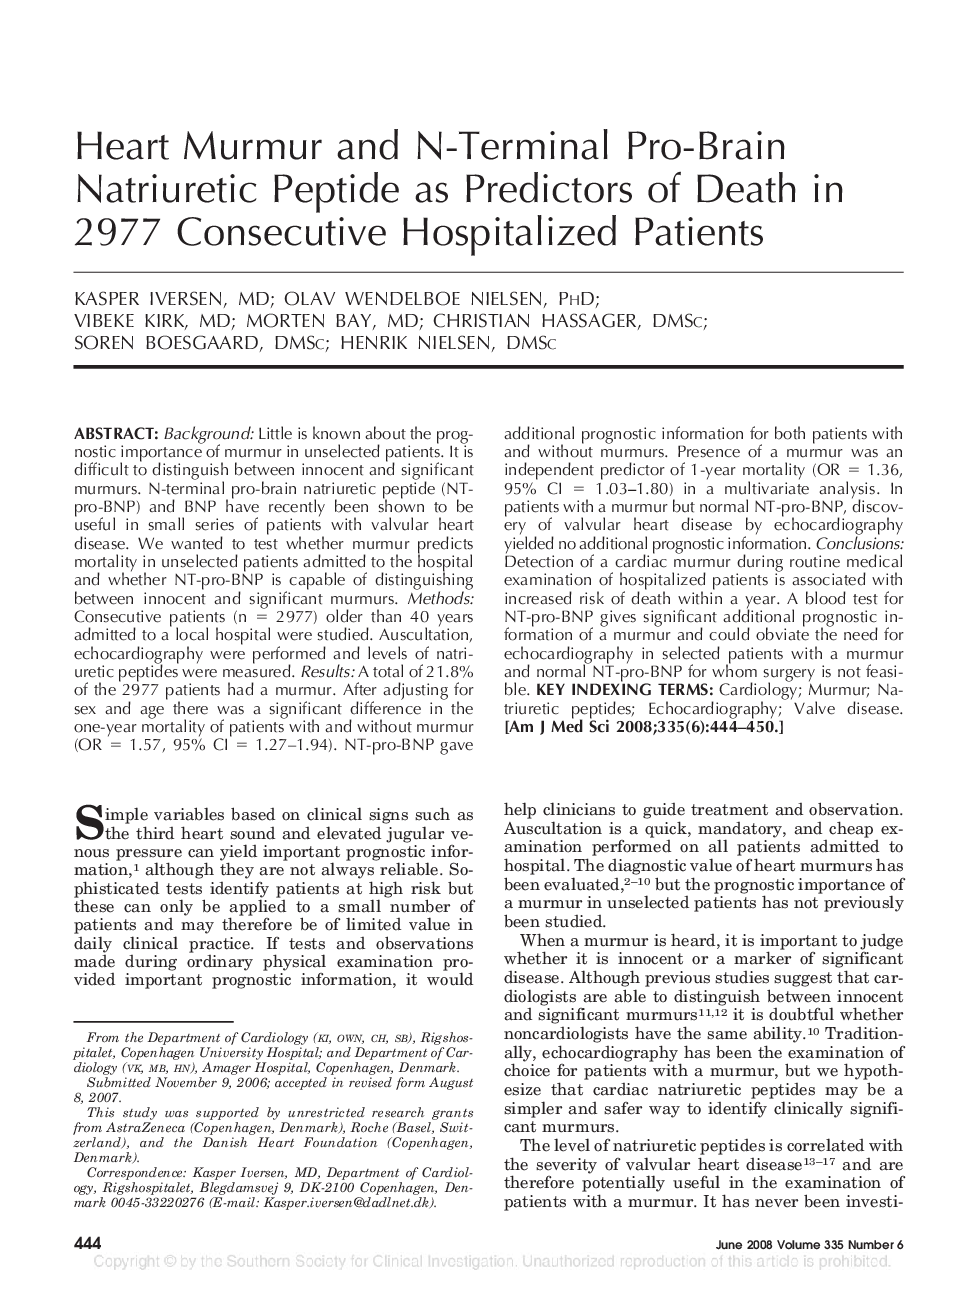 Heart Murmur and N-Terminal Pro-Brain Natriuretic Peptide as Predictors of Death in 2977 Consecutive Hospitalized Patients